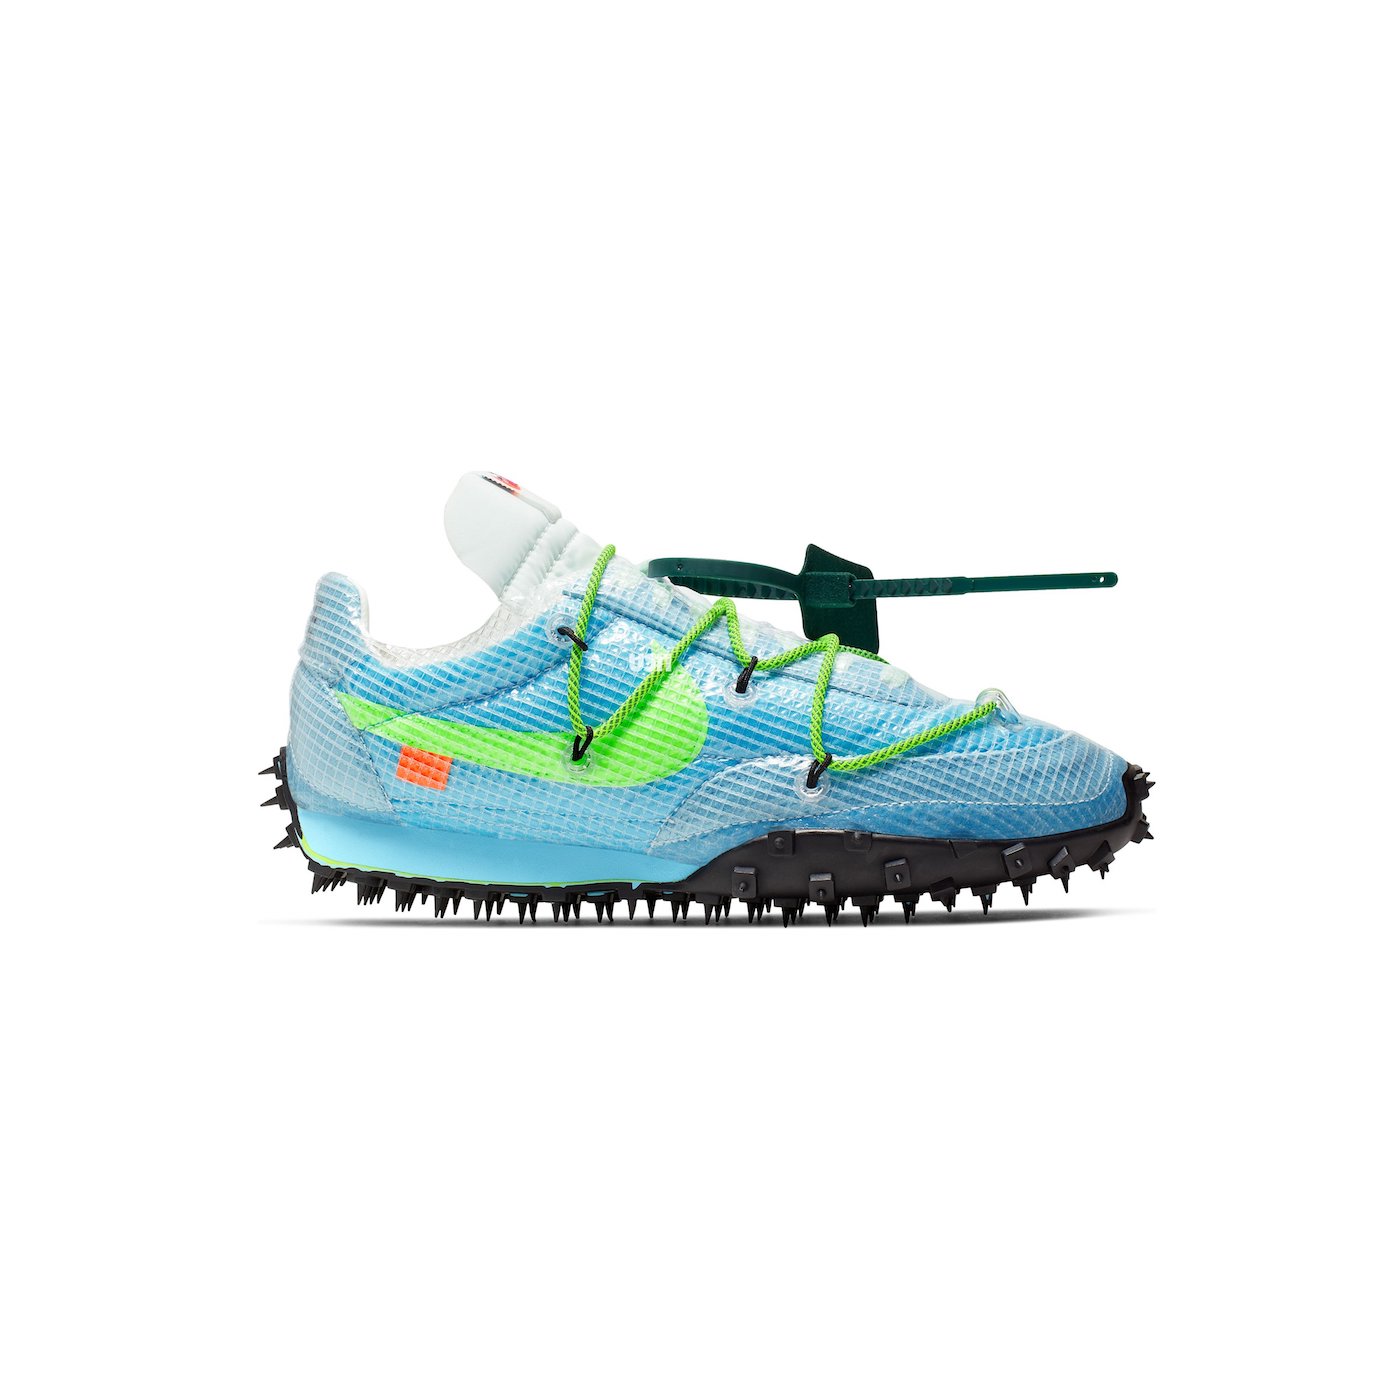 Off-White™ x Nike Waffle Racer SP Finally Get Release Date – PAUSE ...